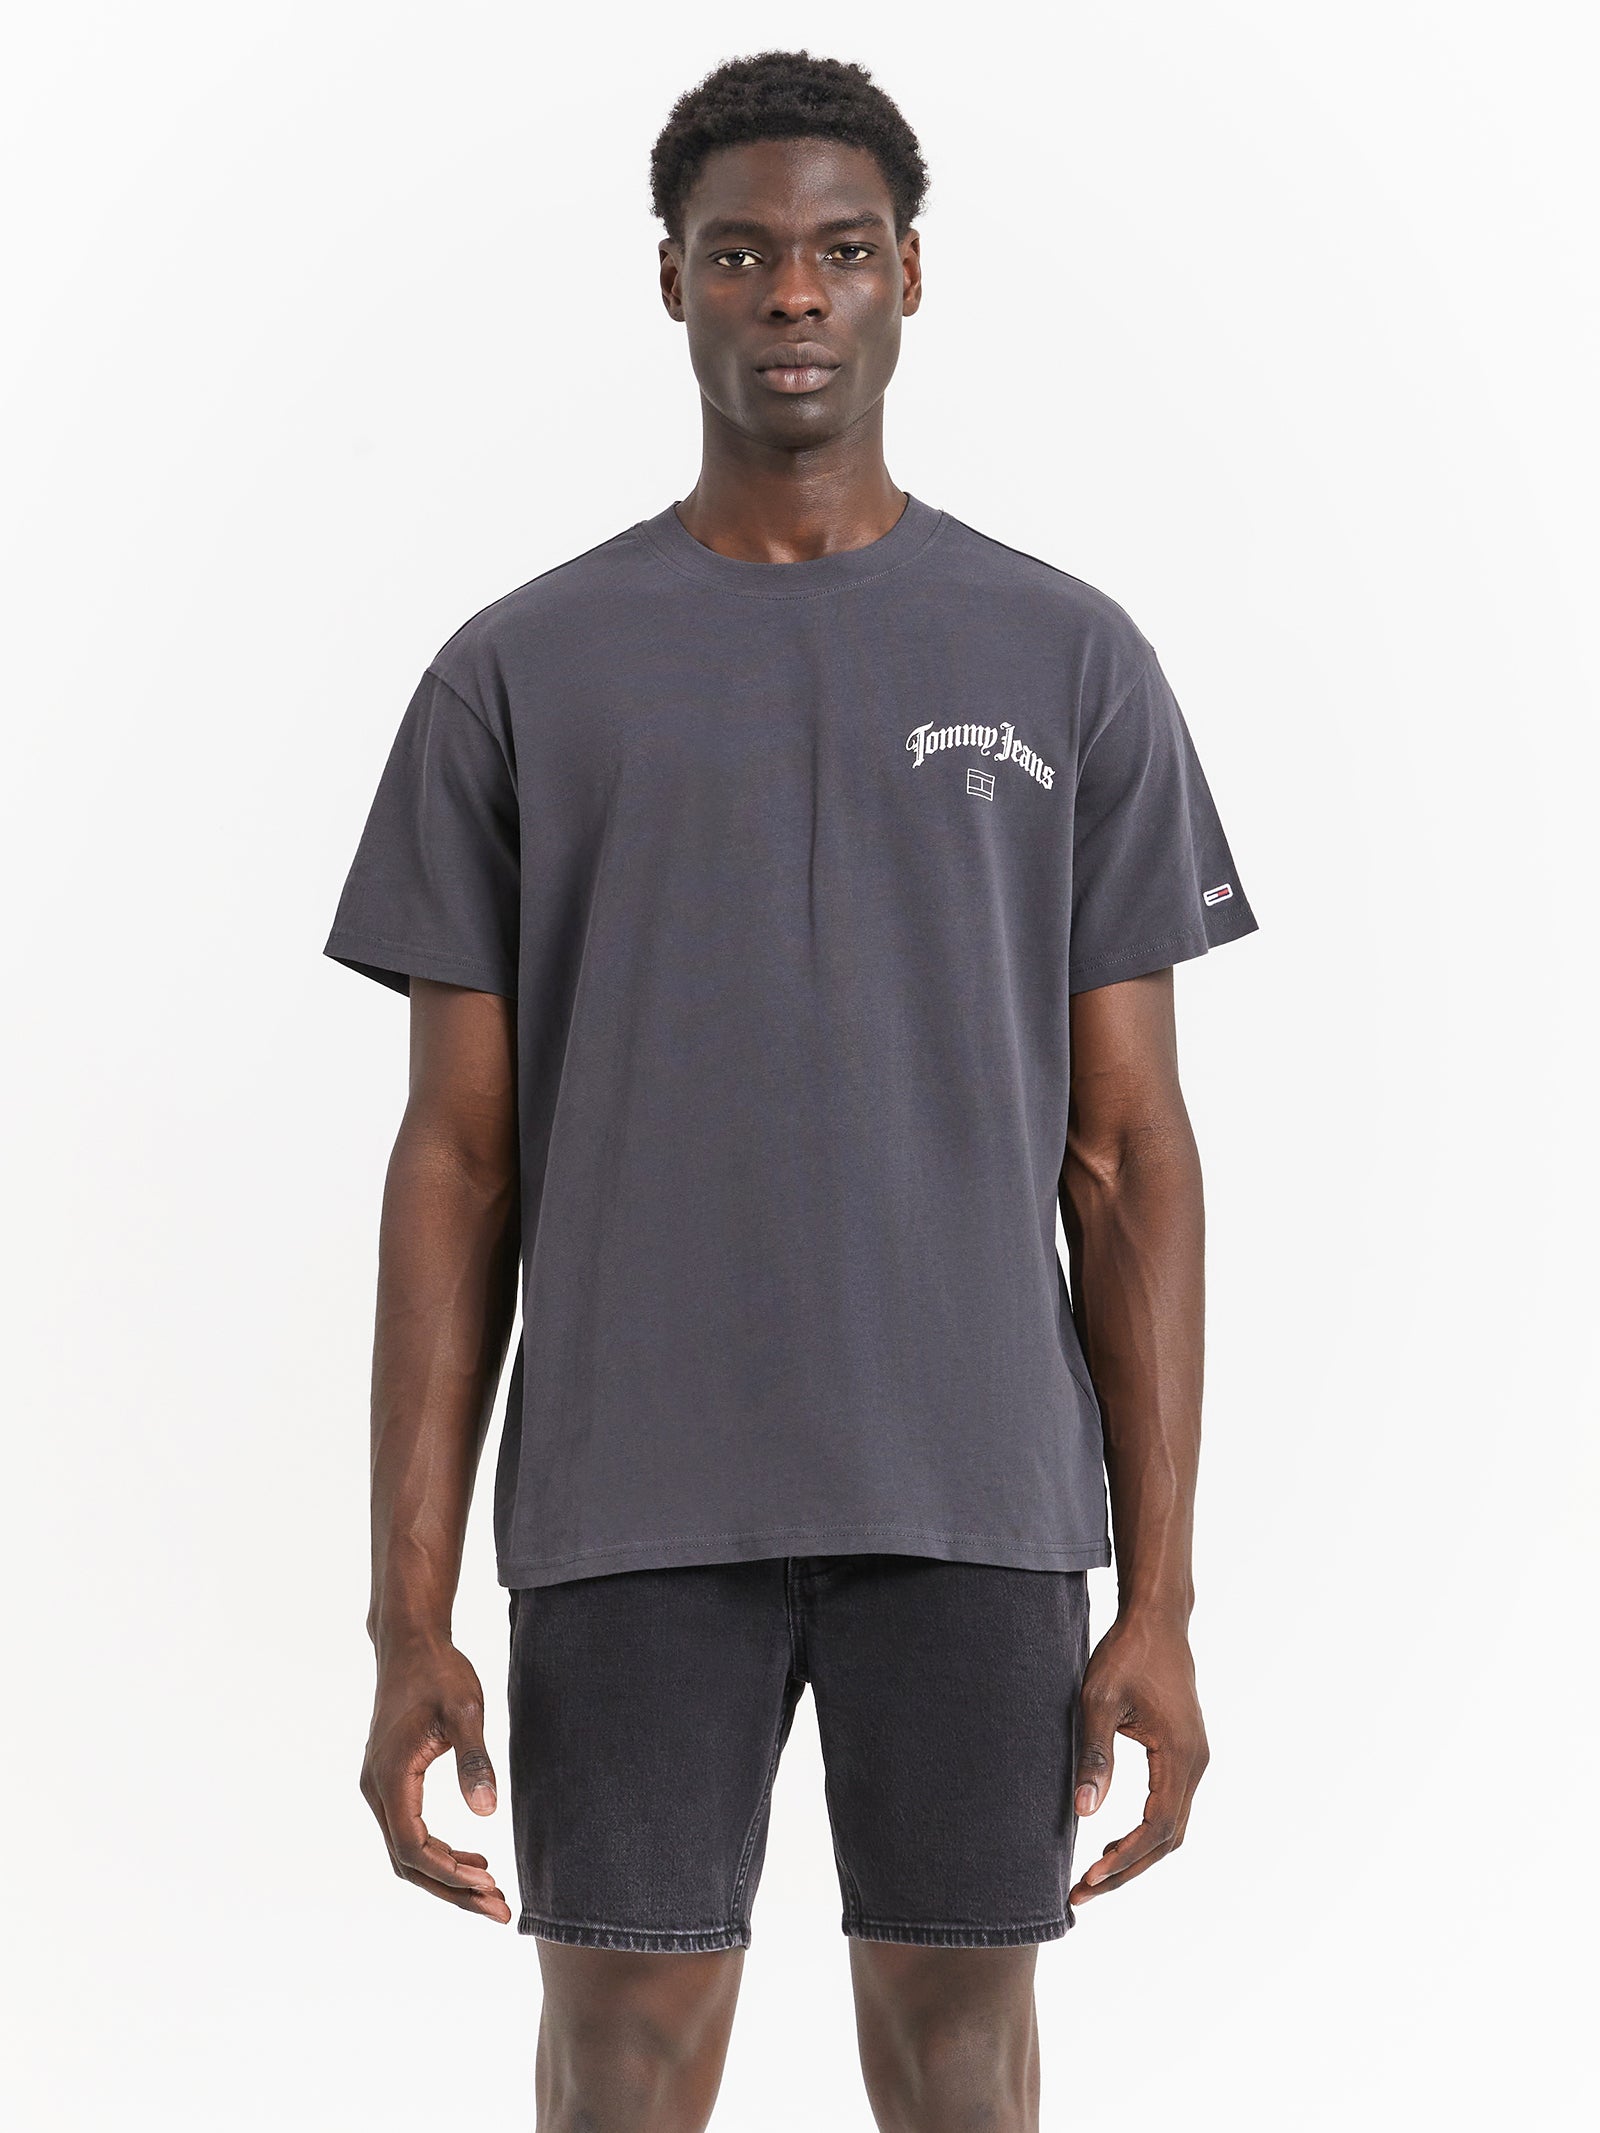 Back Logo Relaxed Fit T-Shirt in New Charcoal